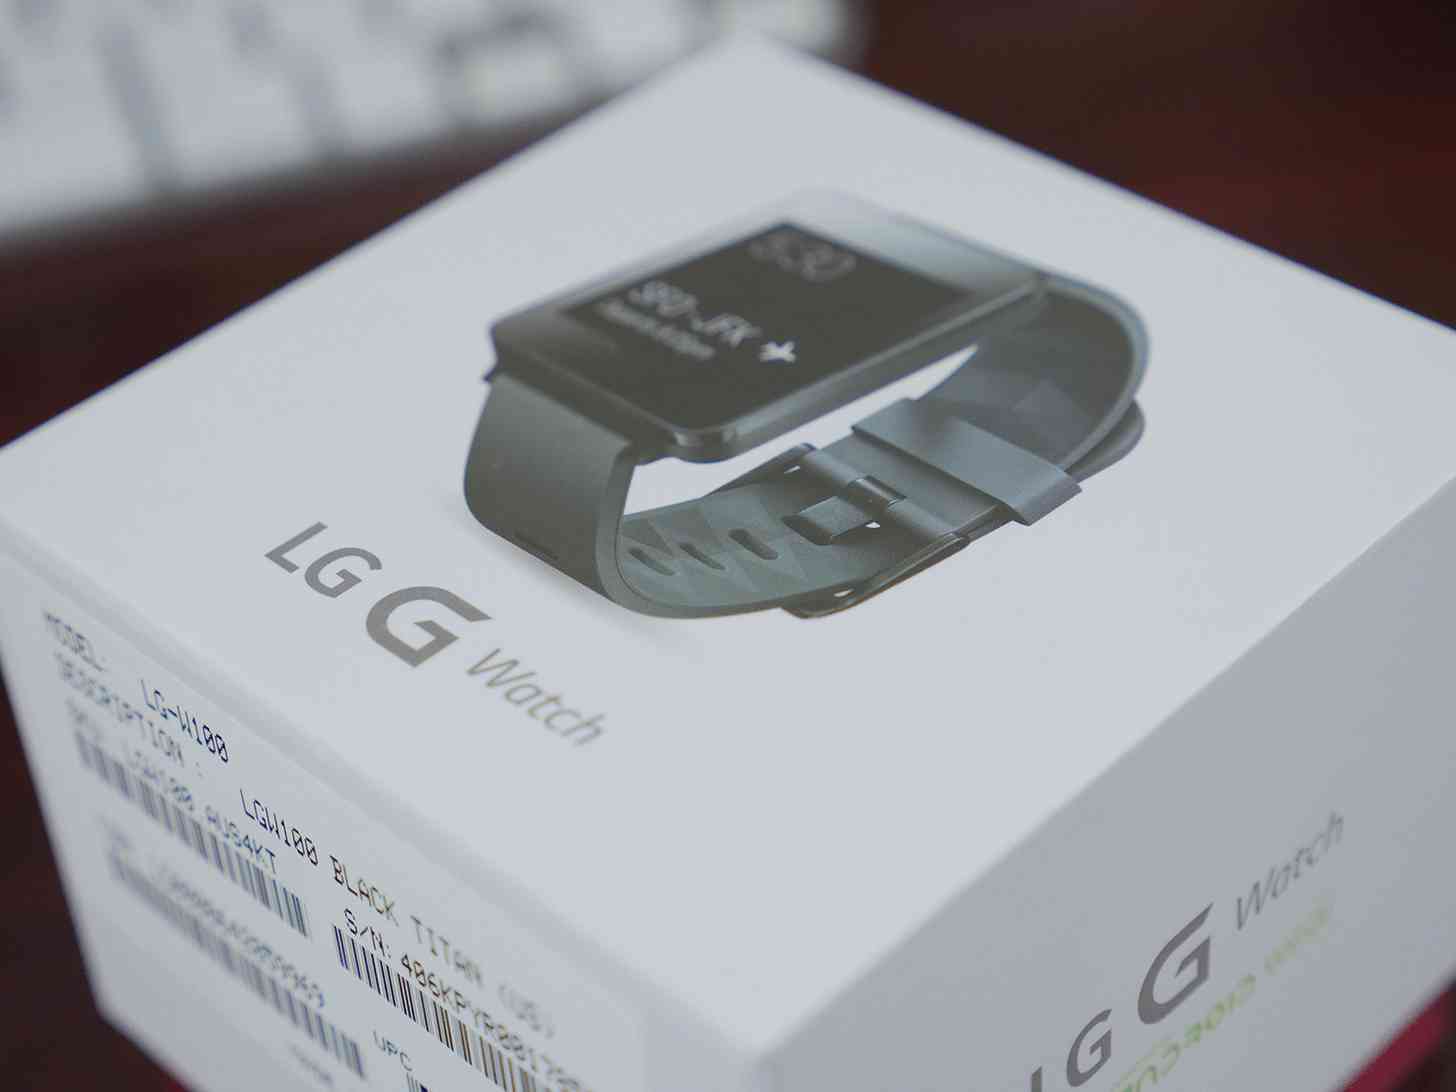 LG G Watch unboxing